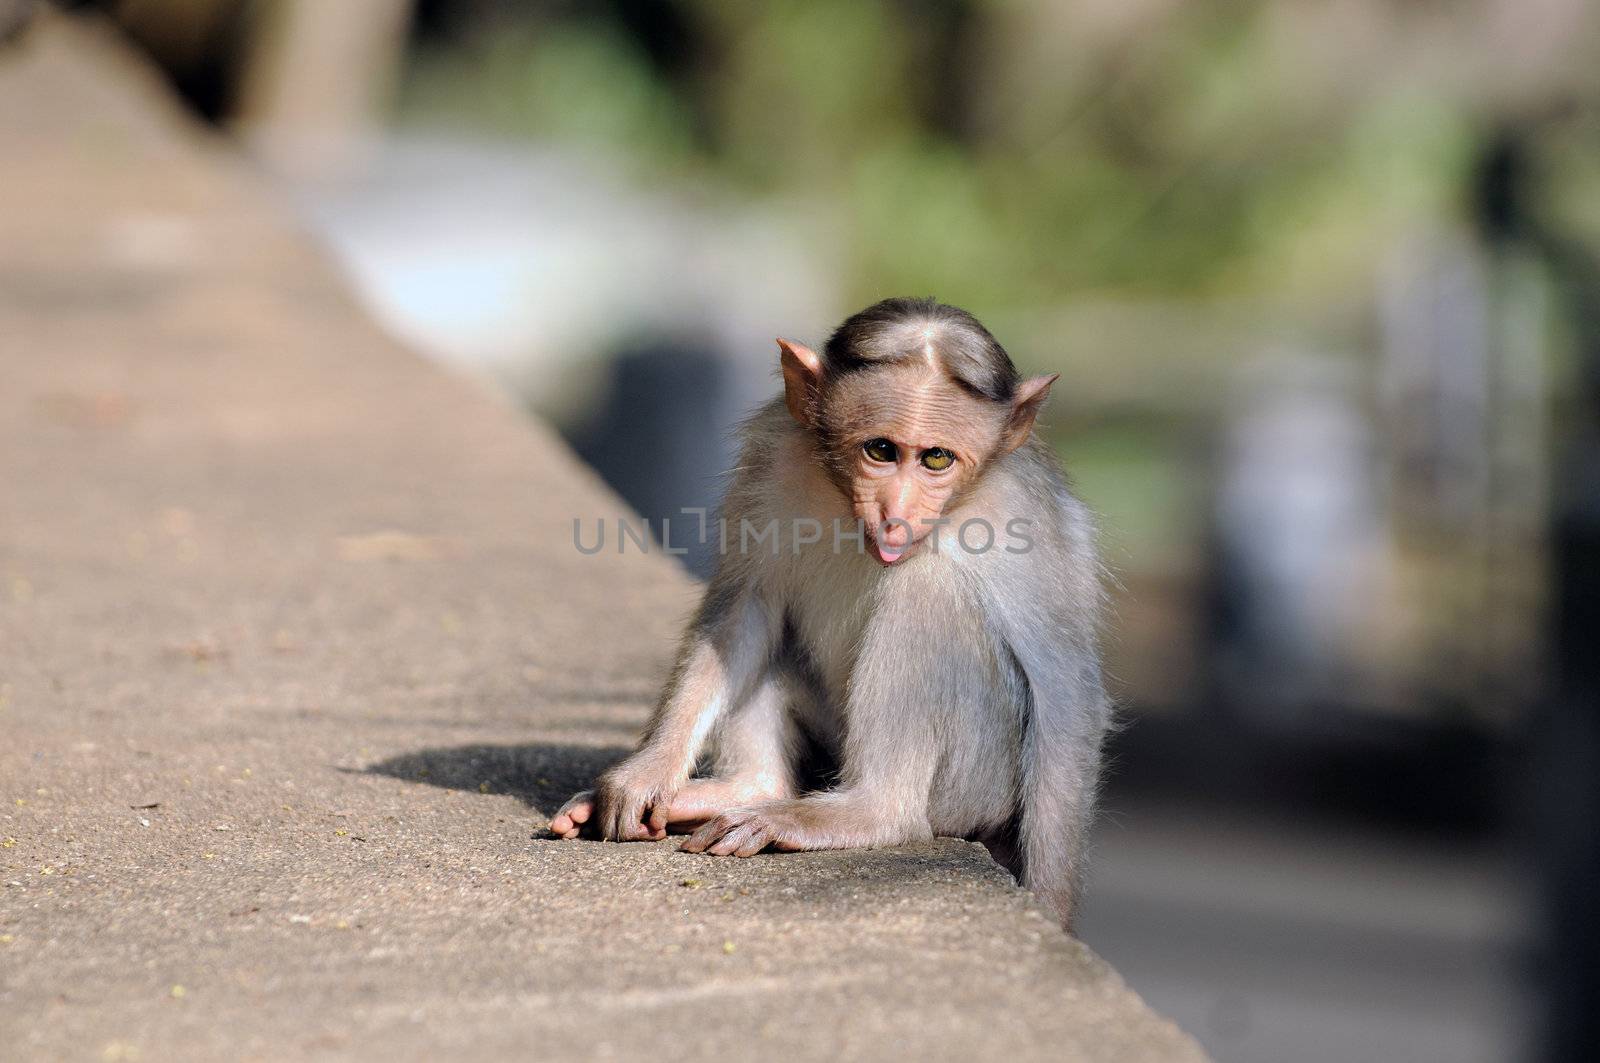 A young bonnet macaque putting his tongue out